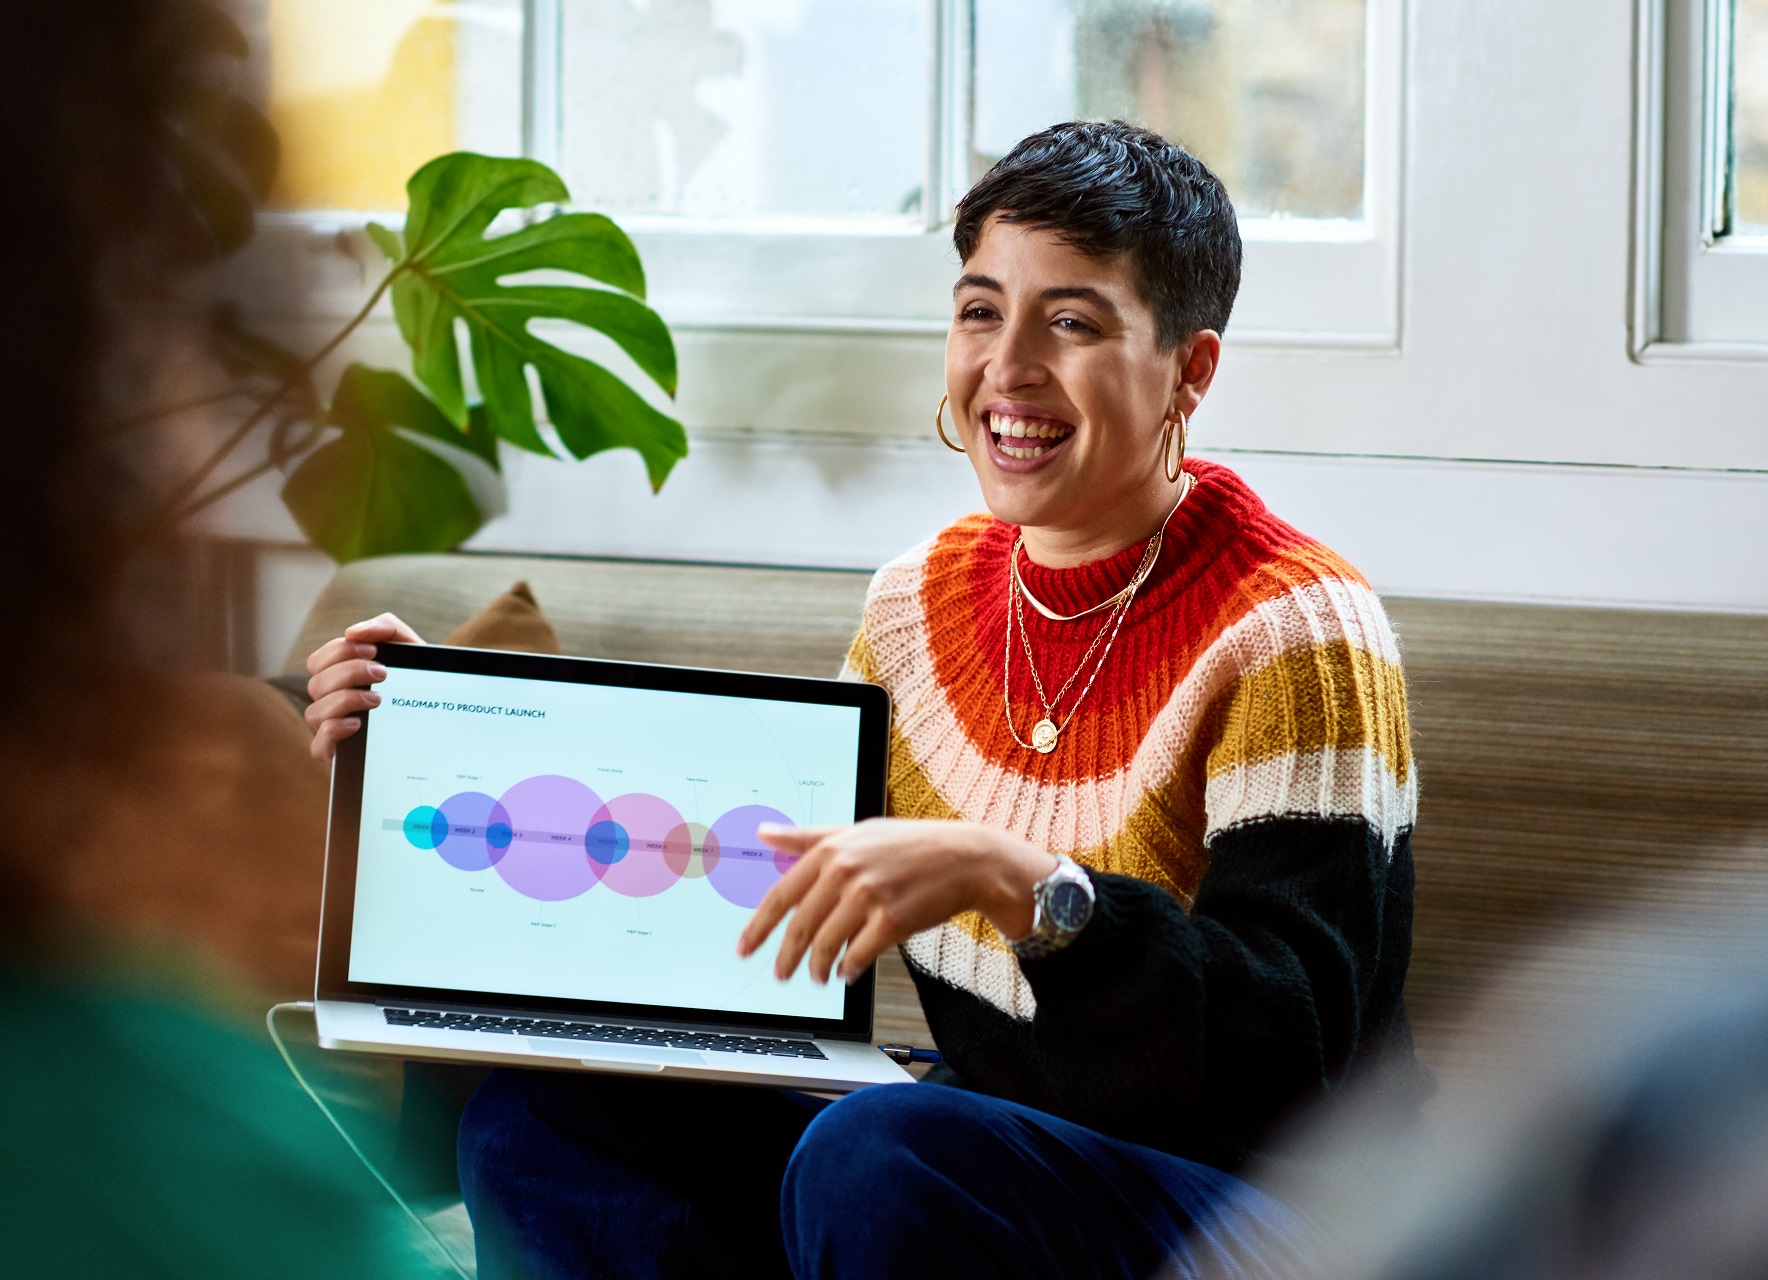 Digital skills bootcamps header showing a woman with dark hair and an orange stripy jumper holding a laptop and smiling